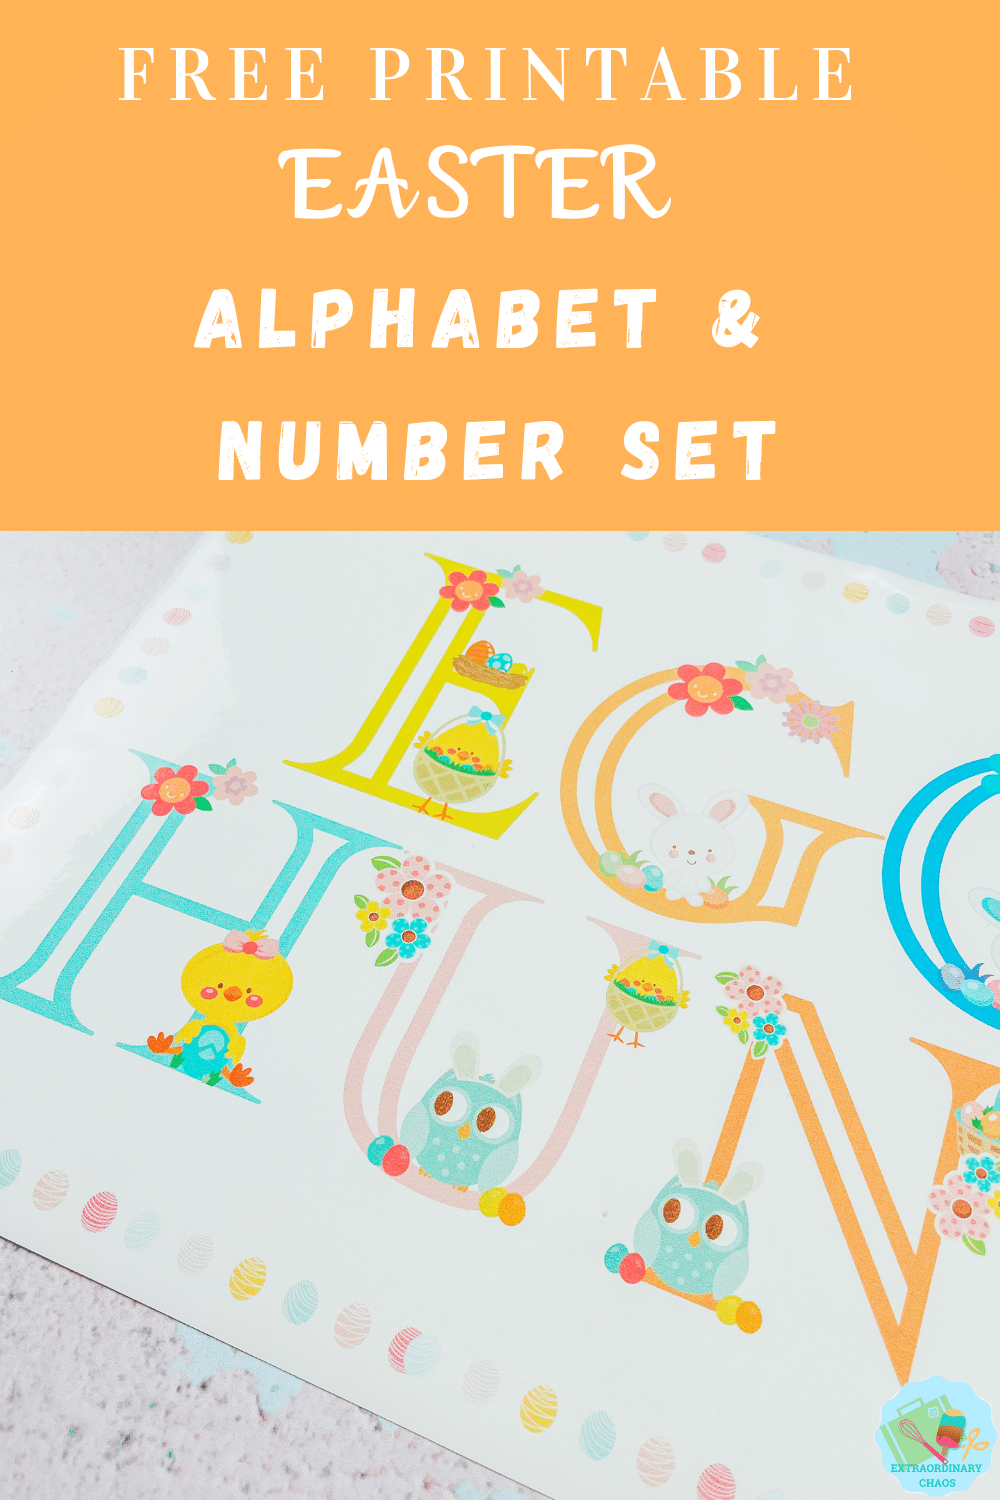 Free printable Easter Alphabet fro Cricut Easter Projects , sublimation, print and cut and crafts for kids